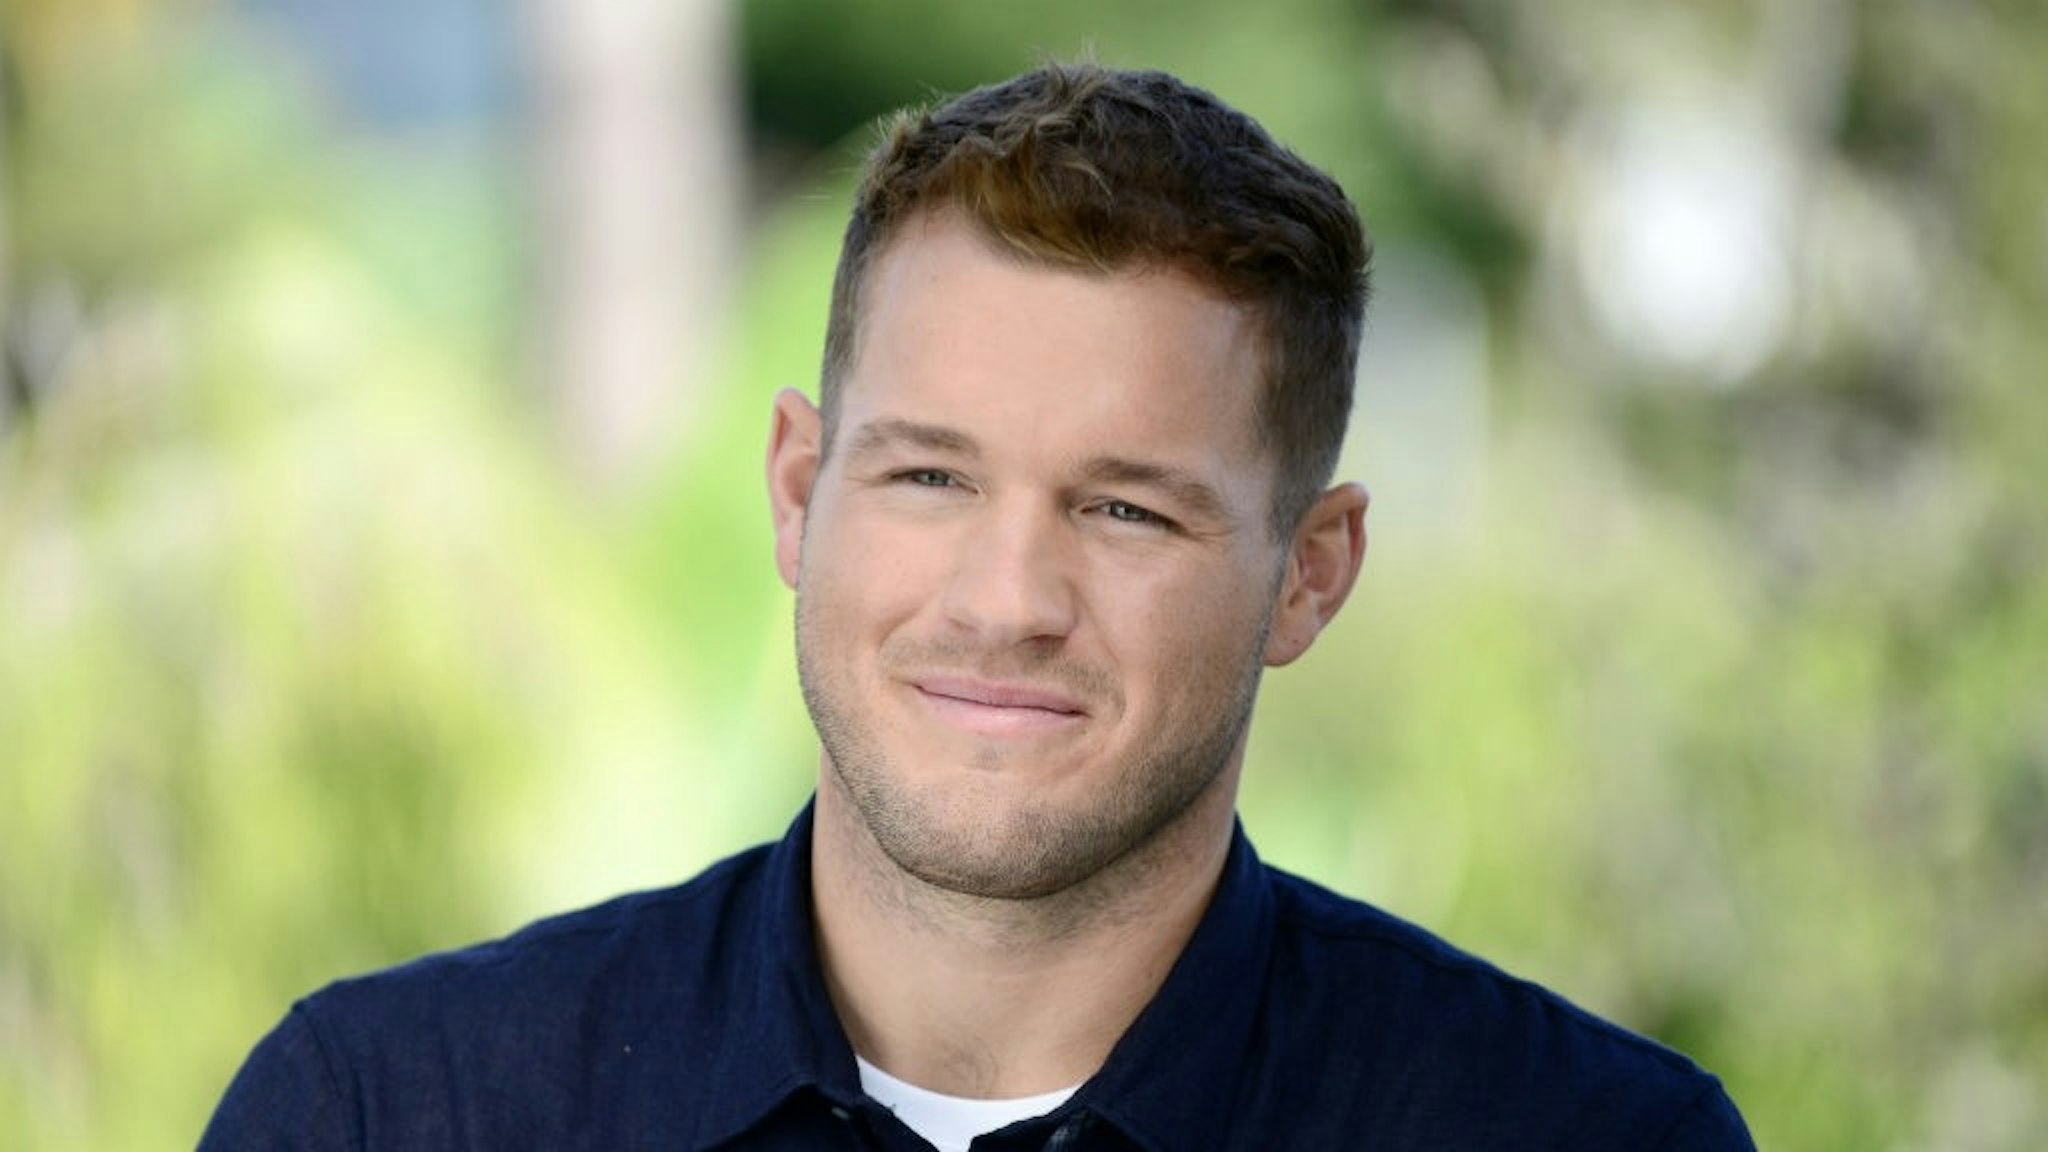 MAR VISTA, CALIFORNIA - OCTOBER 08: Colton Underwood stars in a new ad campaign for Tubi, the worlds largest free movie and TV streaming service on October 08, 2019 in Mar Vista, California. (Photo by Jerod Harris/Getty Images for Tubi)